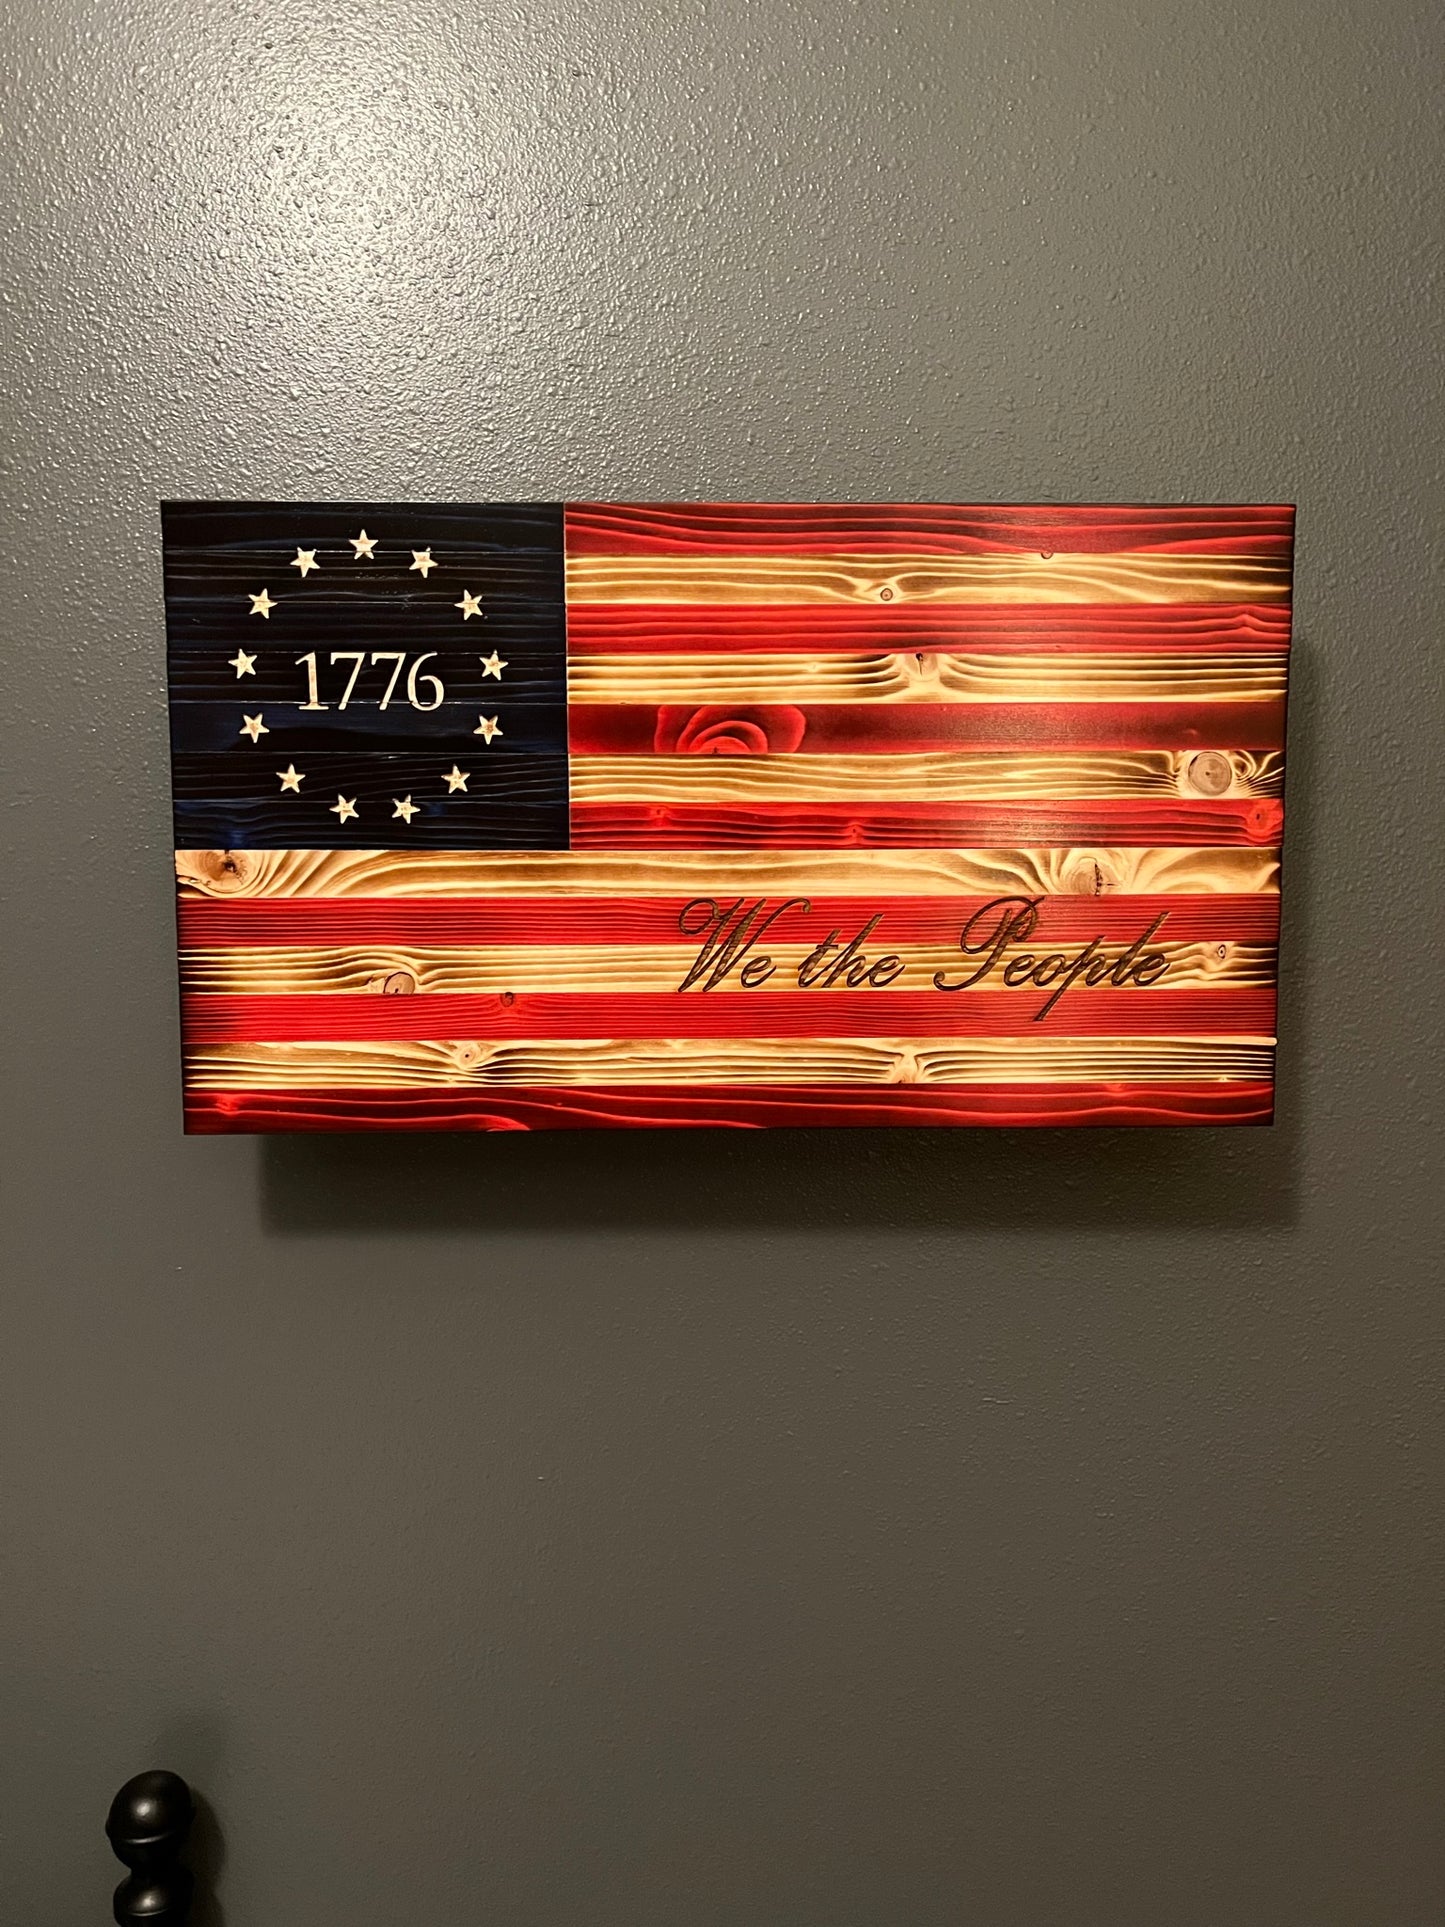 *NEW* The "Natural" We The People Betsy Ross 1776 Small Concealment Flag